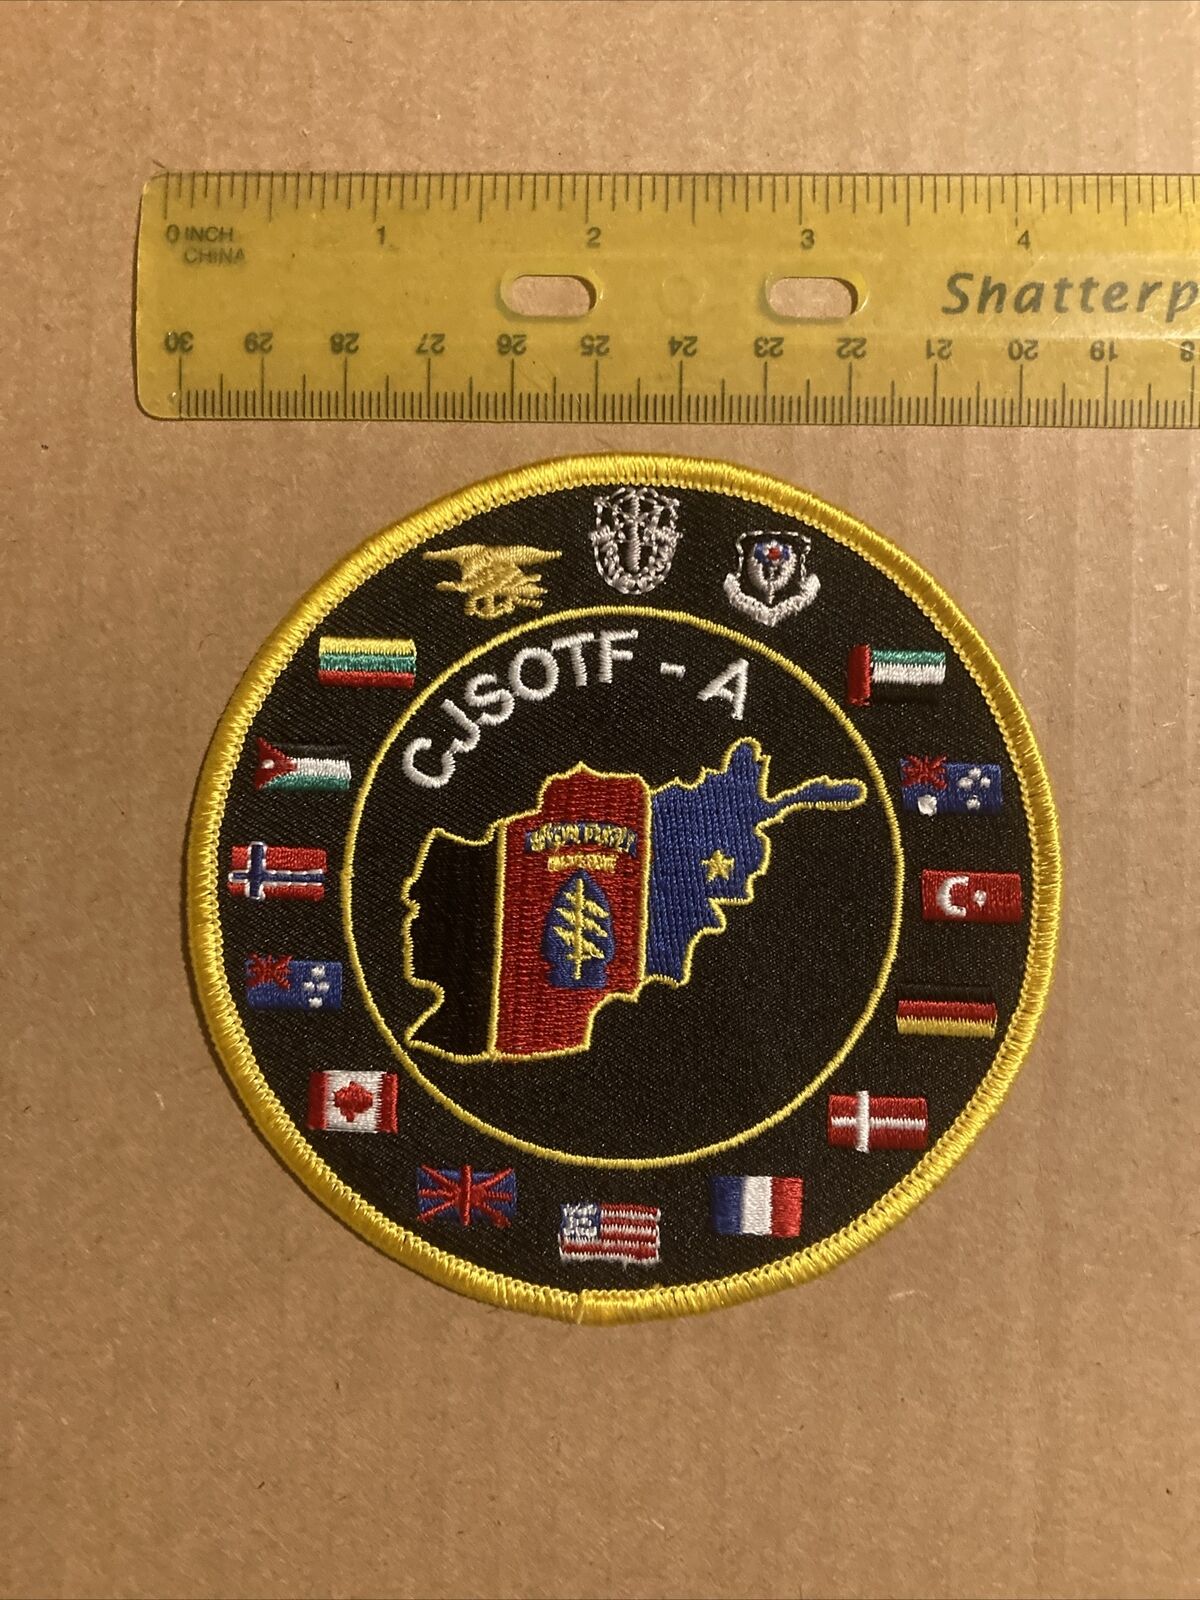 CJSOTF-A Afghanistan Military Patch New